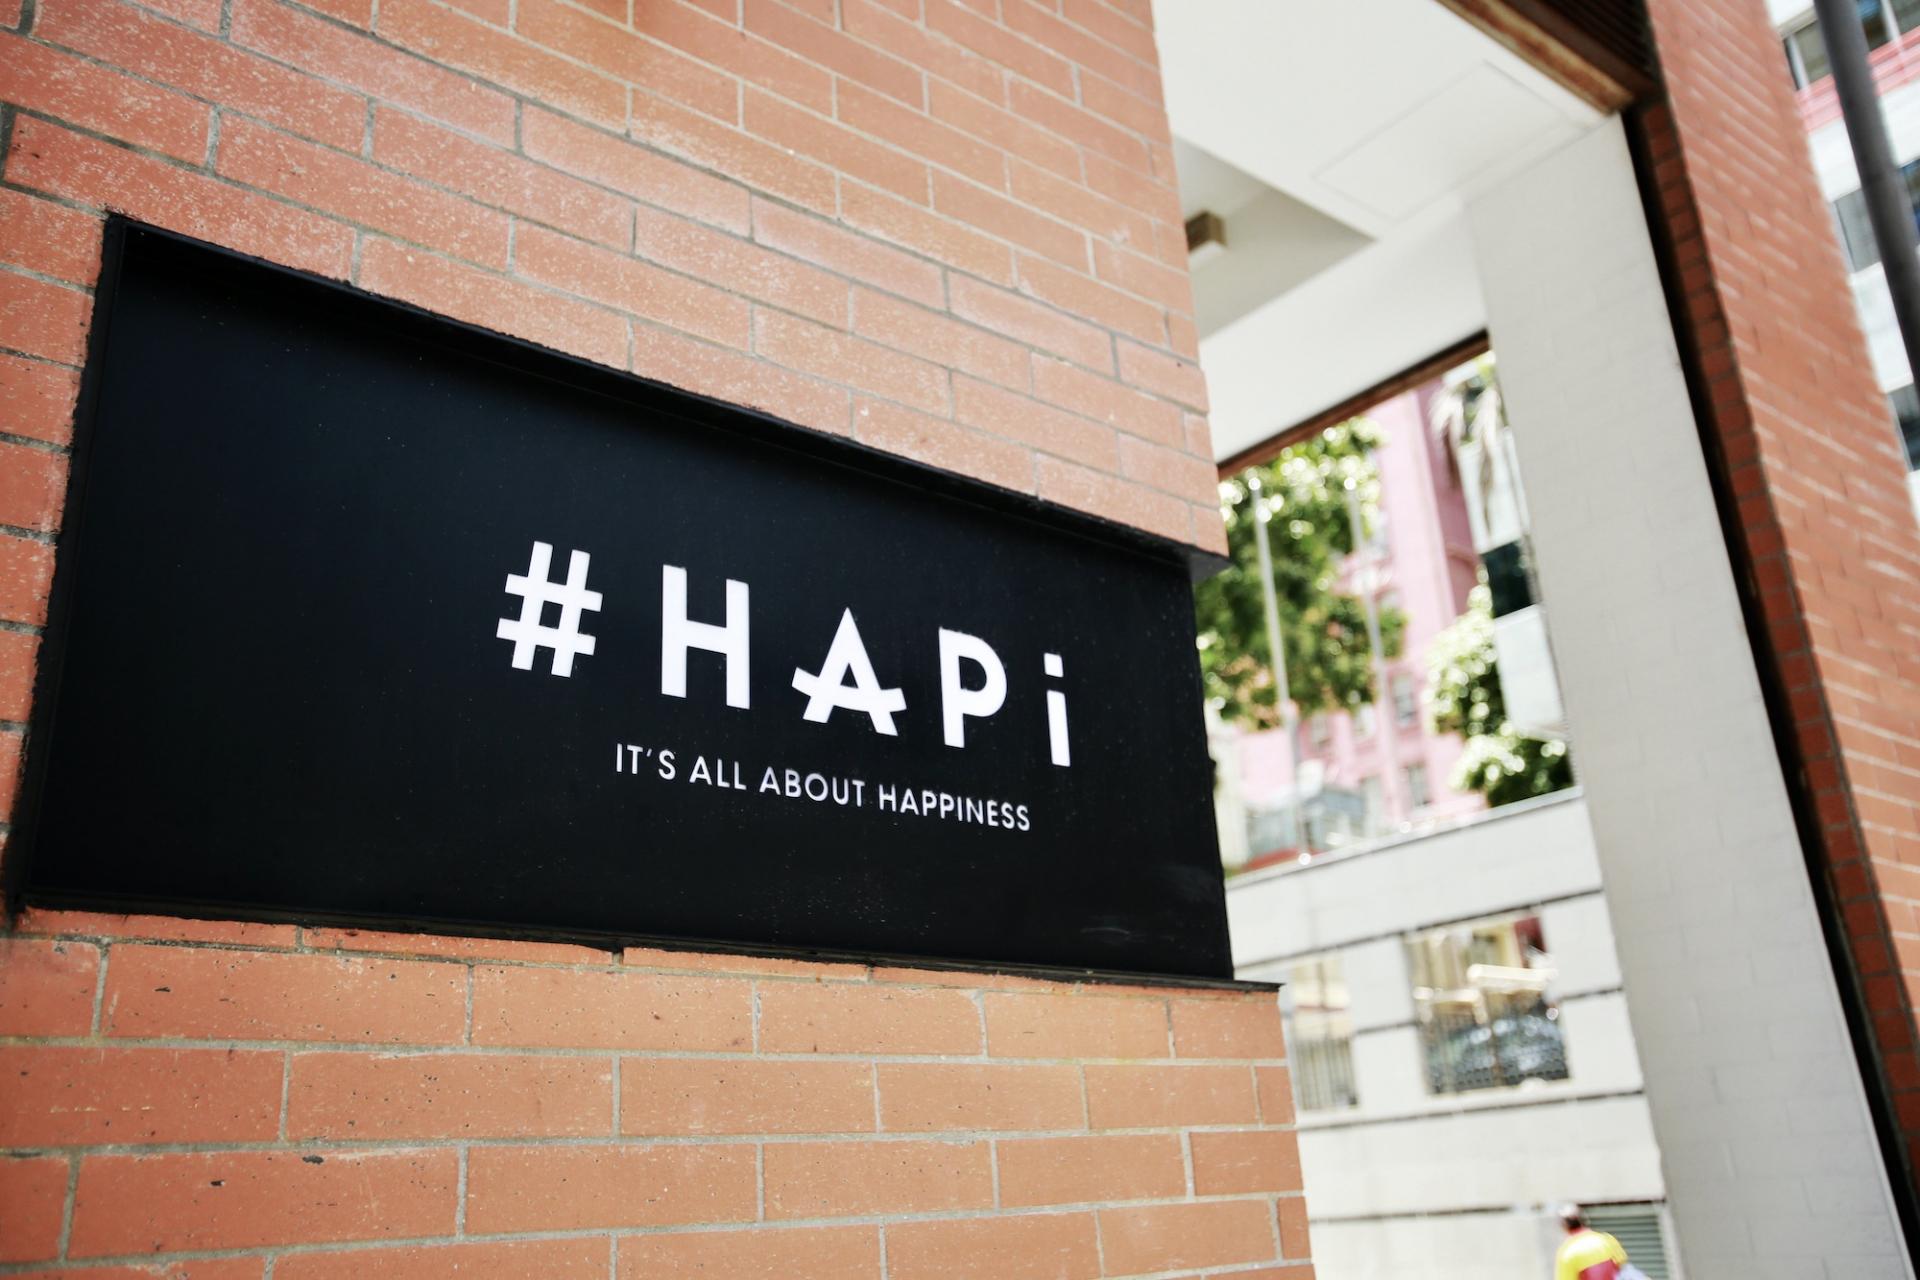 Design High: Lifestyle Shop #HAPi Puts a Smile On Your Face